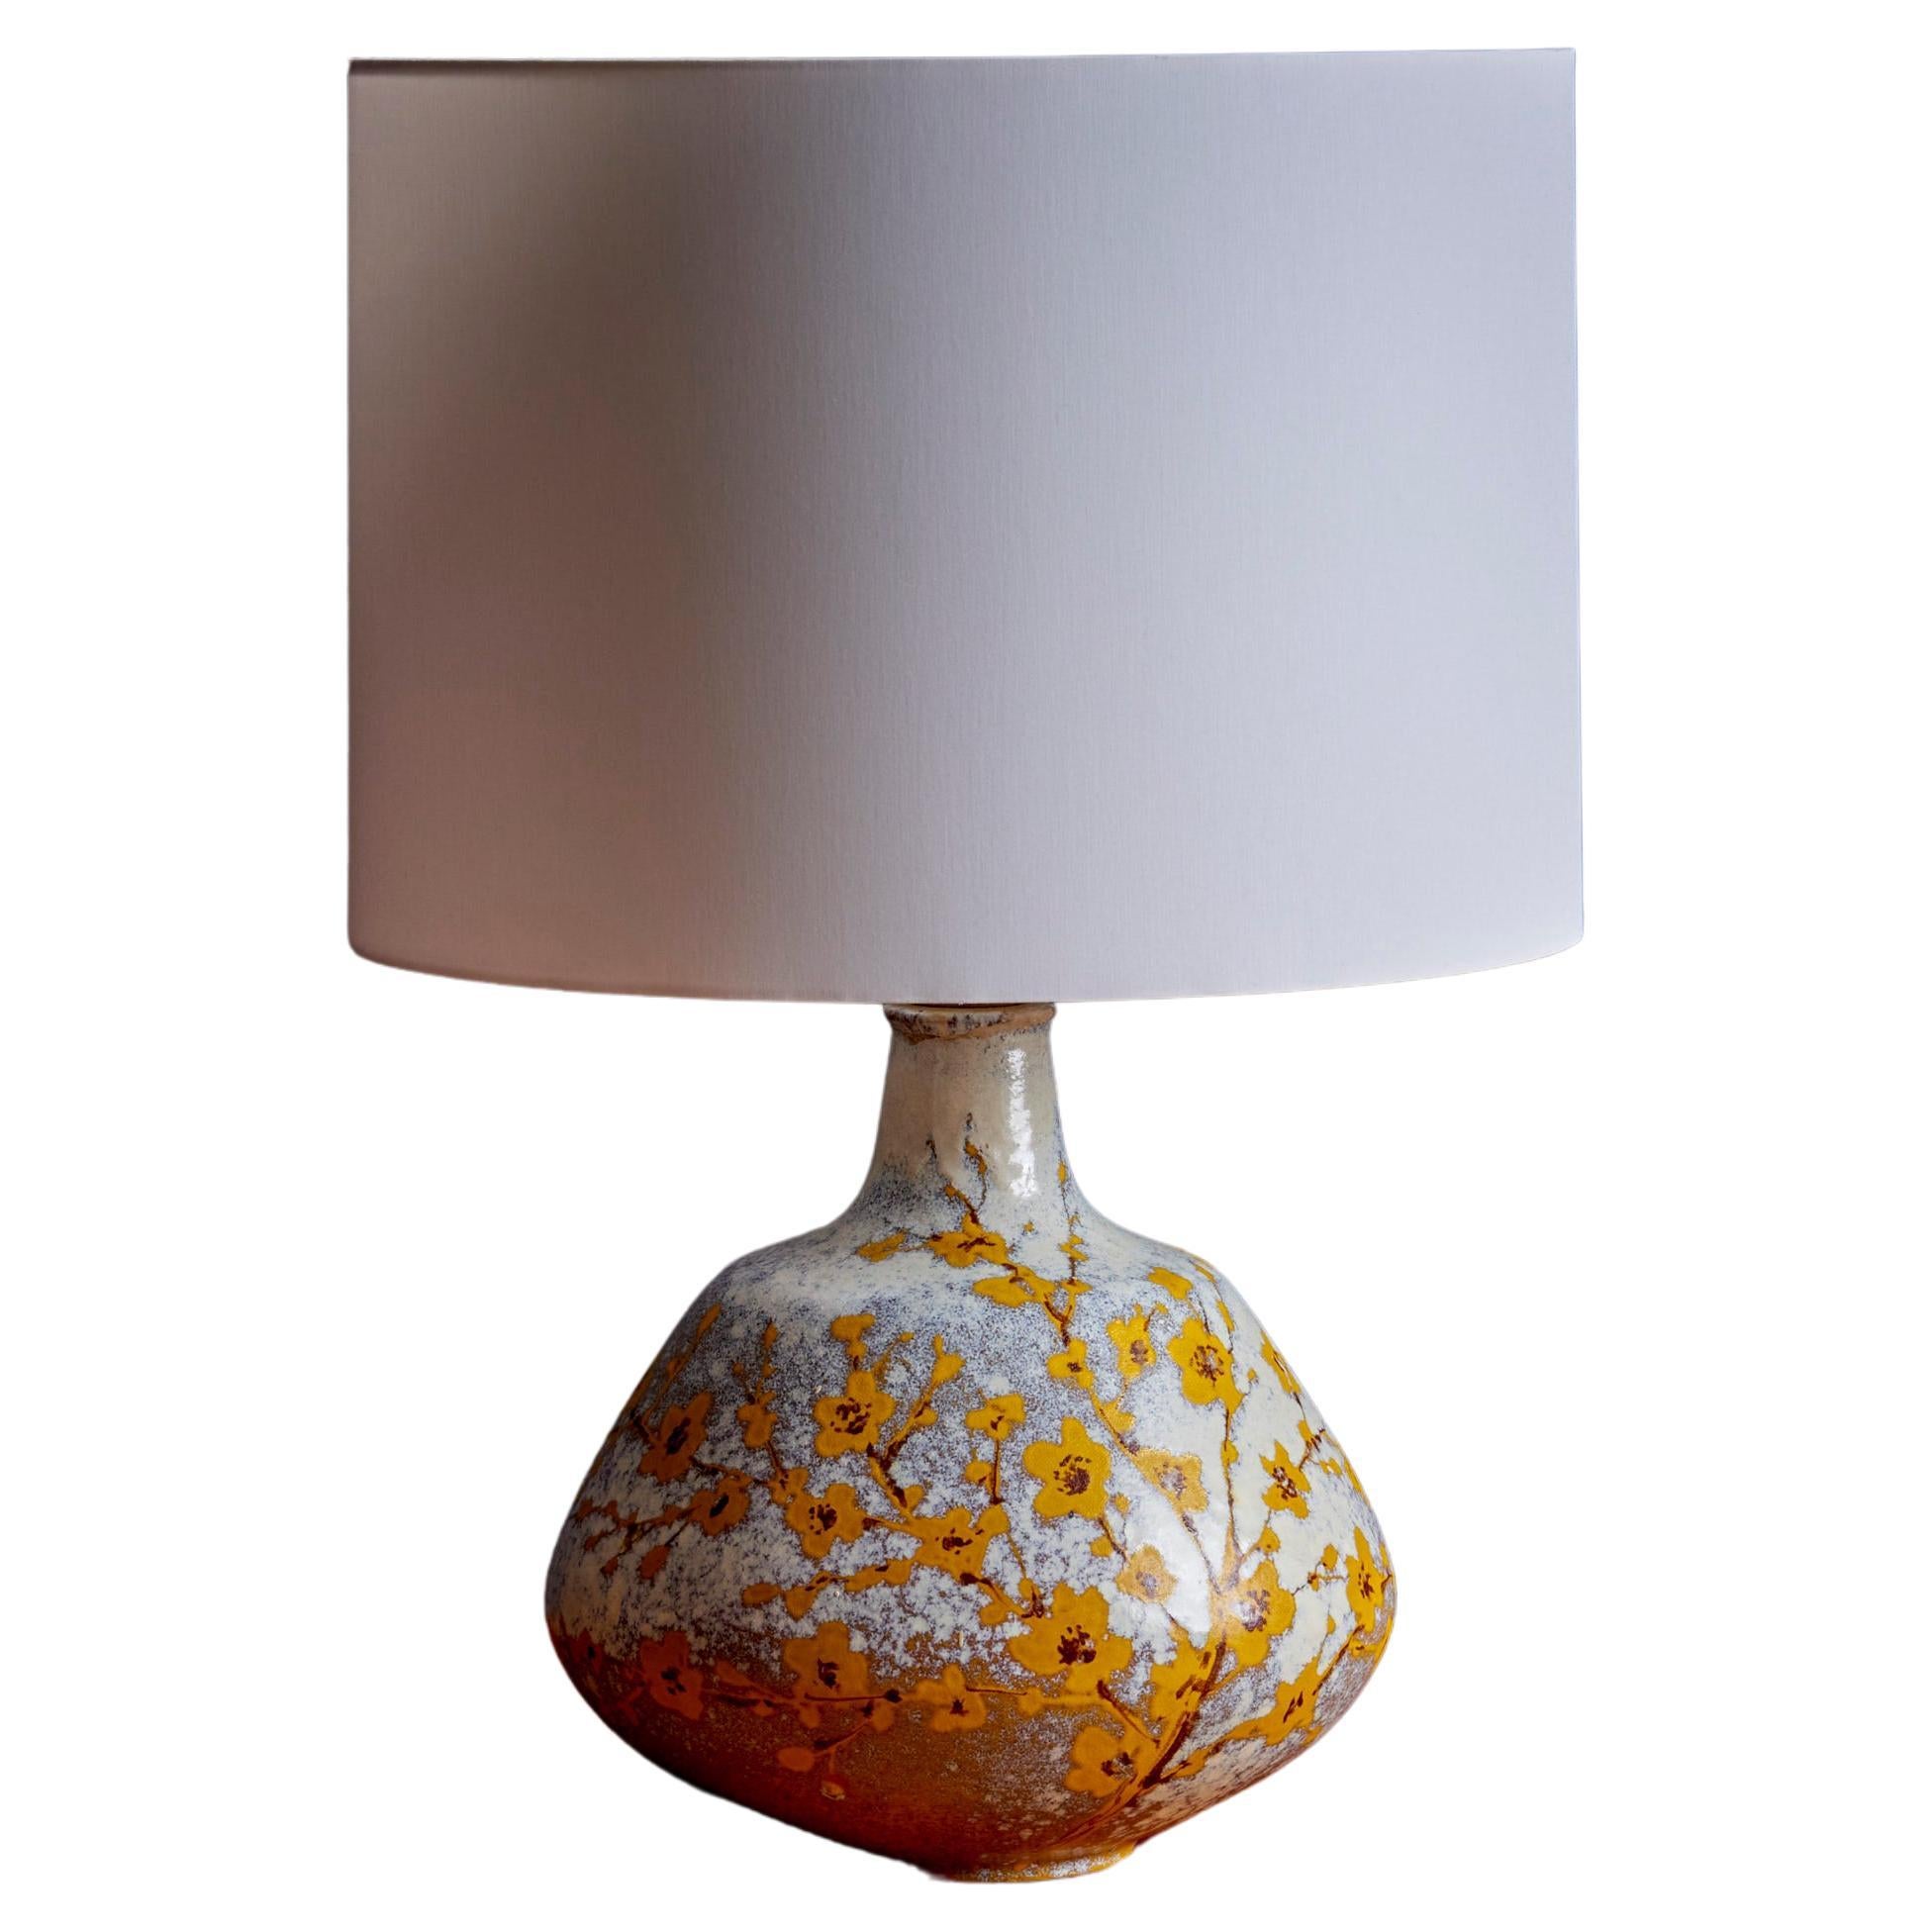 Italian Table Lamp in grey and yellow with flowers, 1960s